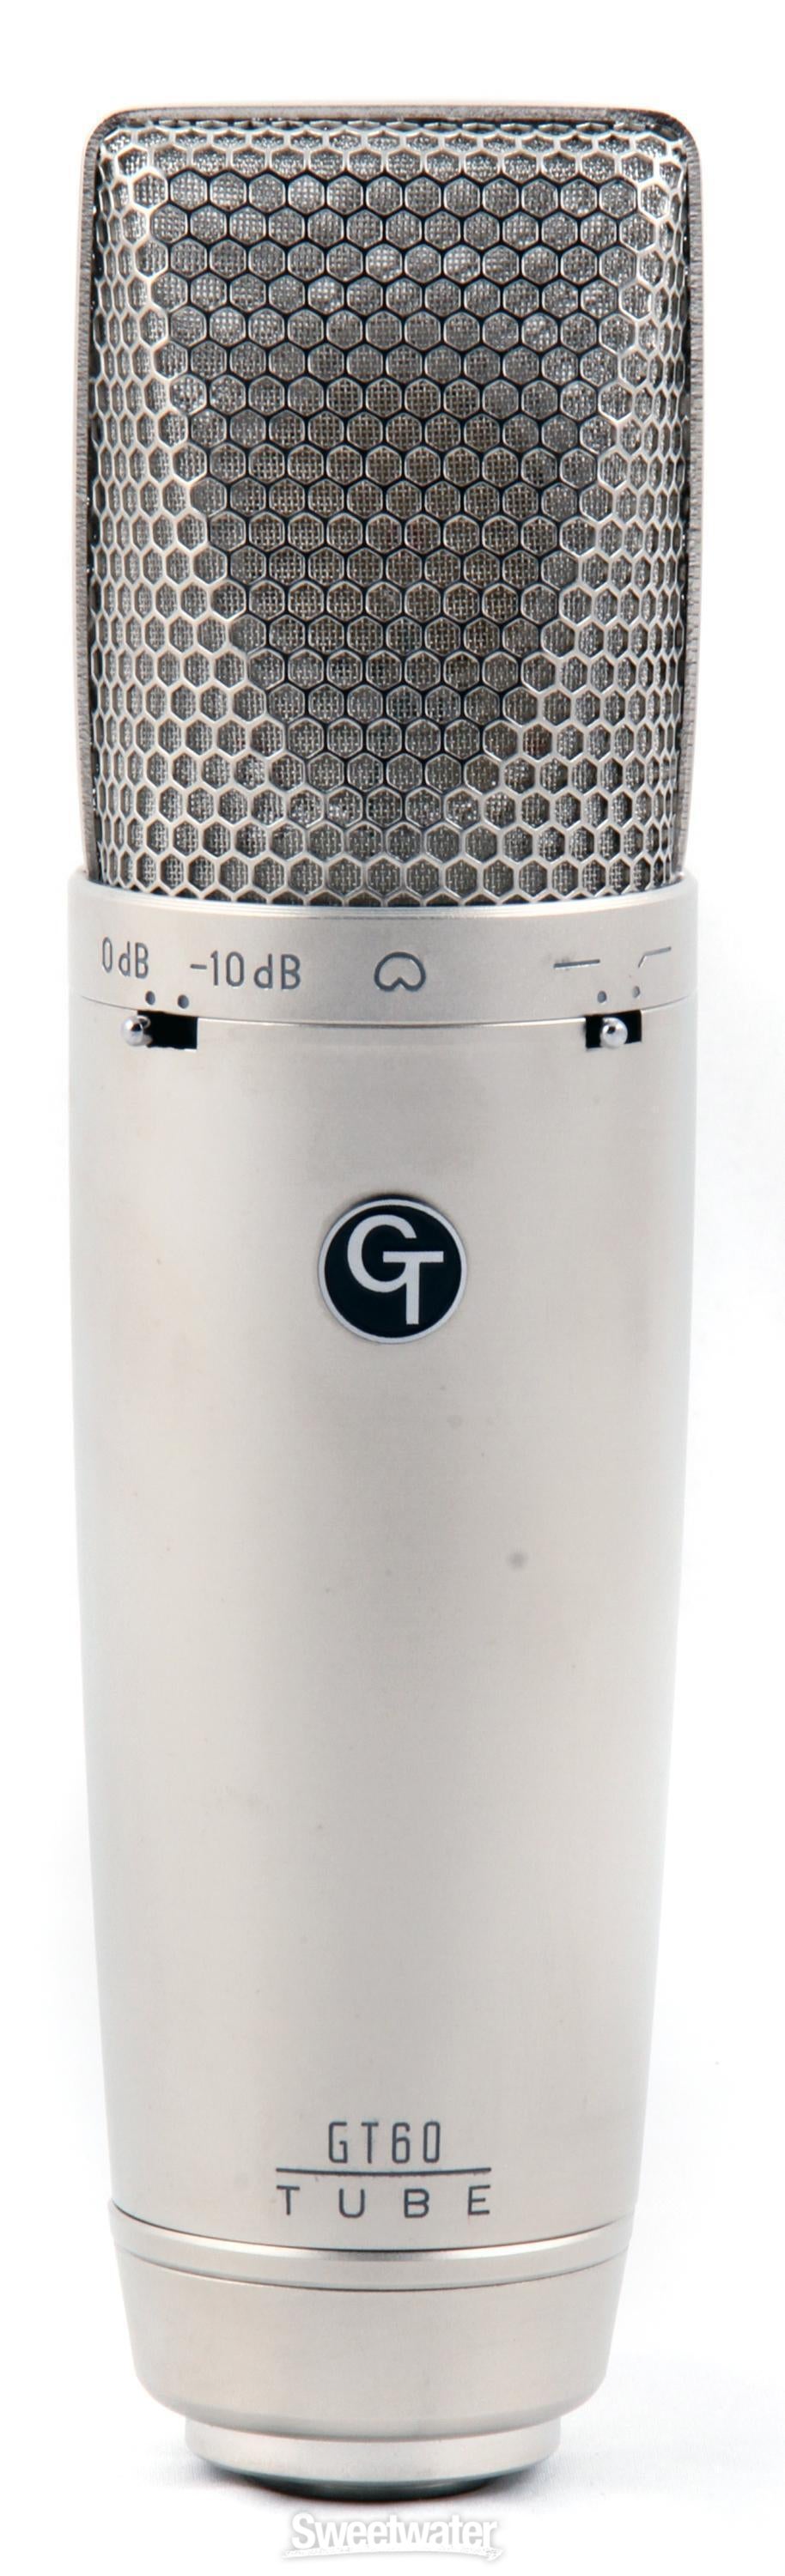 GROOVE TUBES GT67 コンデンサーマイク 希少外形寸法50×195mm - 配信 